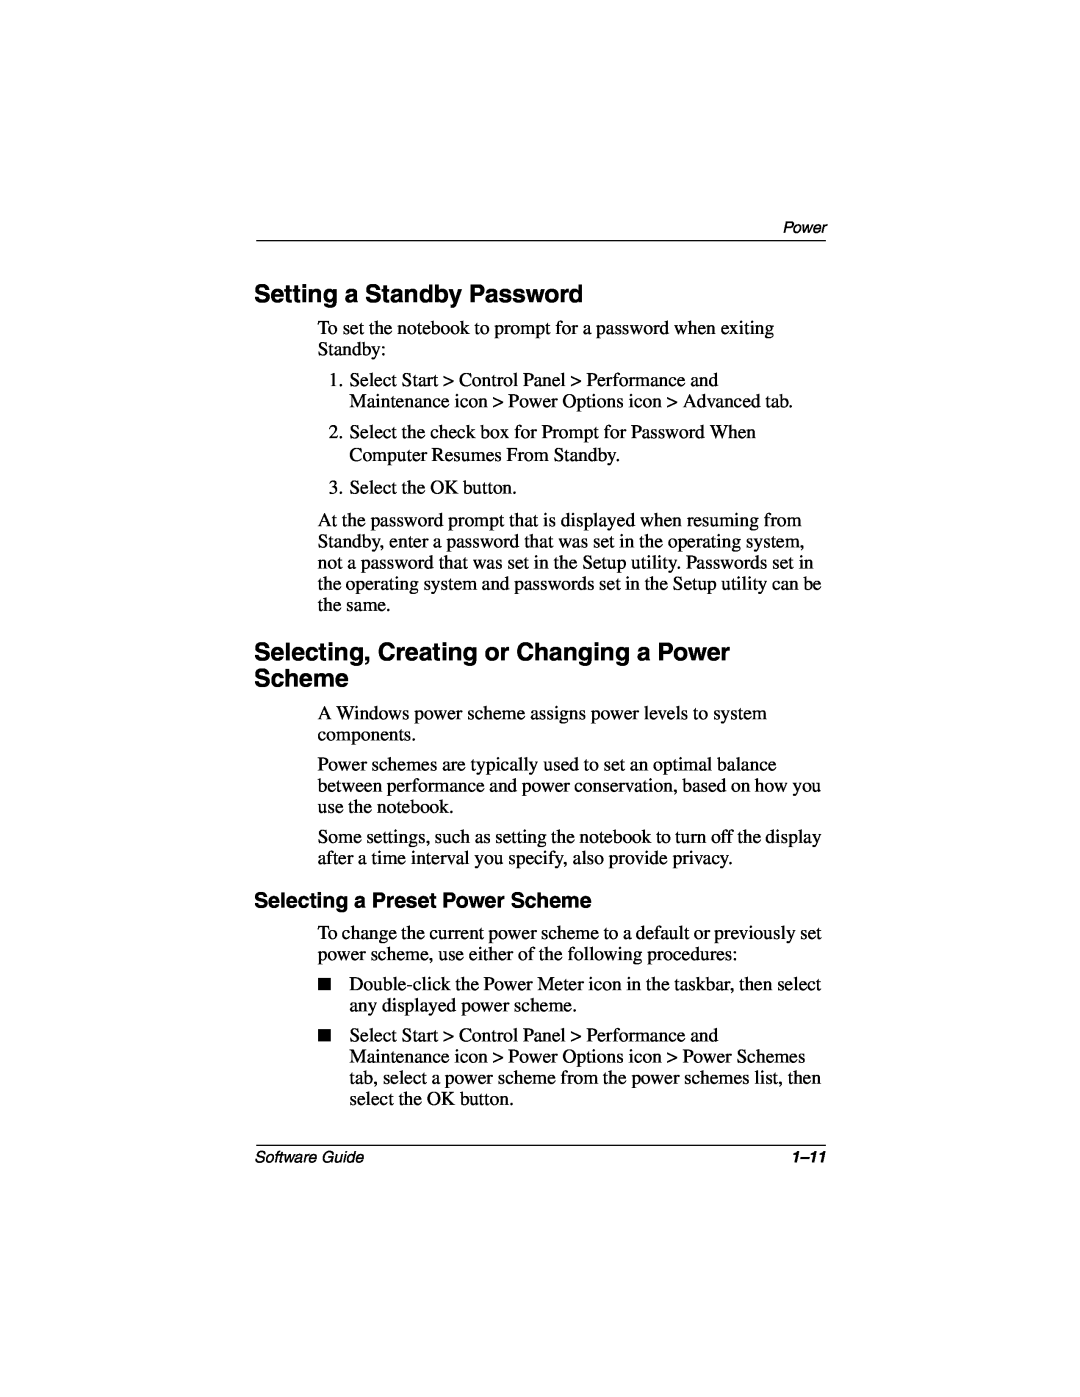 HP 3016US Setting a Standby Password, Selecting, Creating or Changing a Power Scheme, Selecting a Preset Power Scheme 